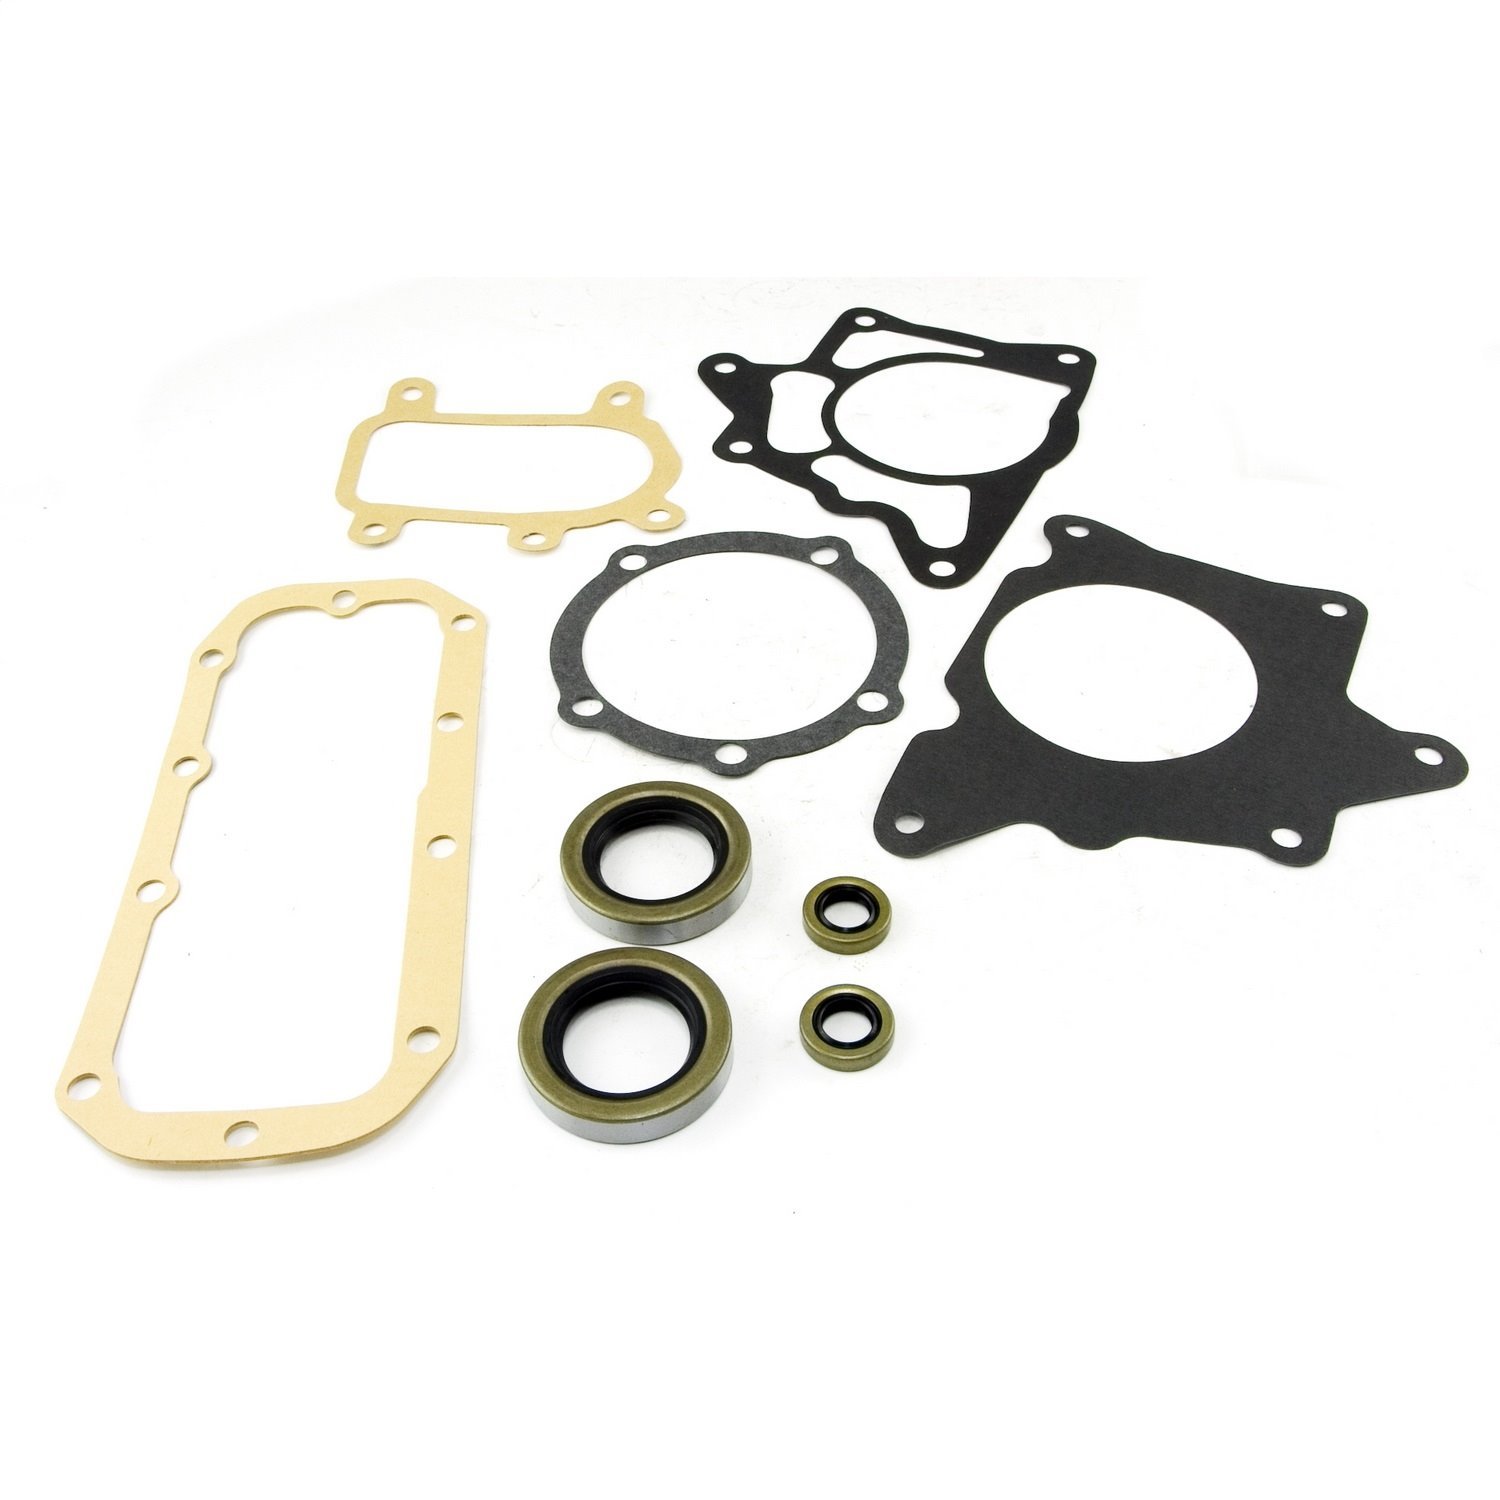 This transfer case gasket and seal kit from Omix-ADA fits 72-79 Jeep CJ5 / CJ6 and 76-79 CJ7 with Dana 20 transfer case.